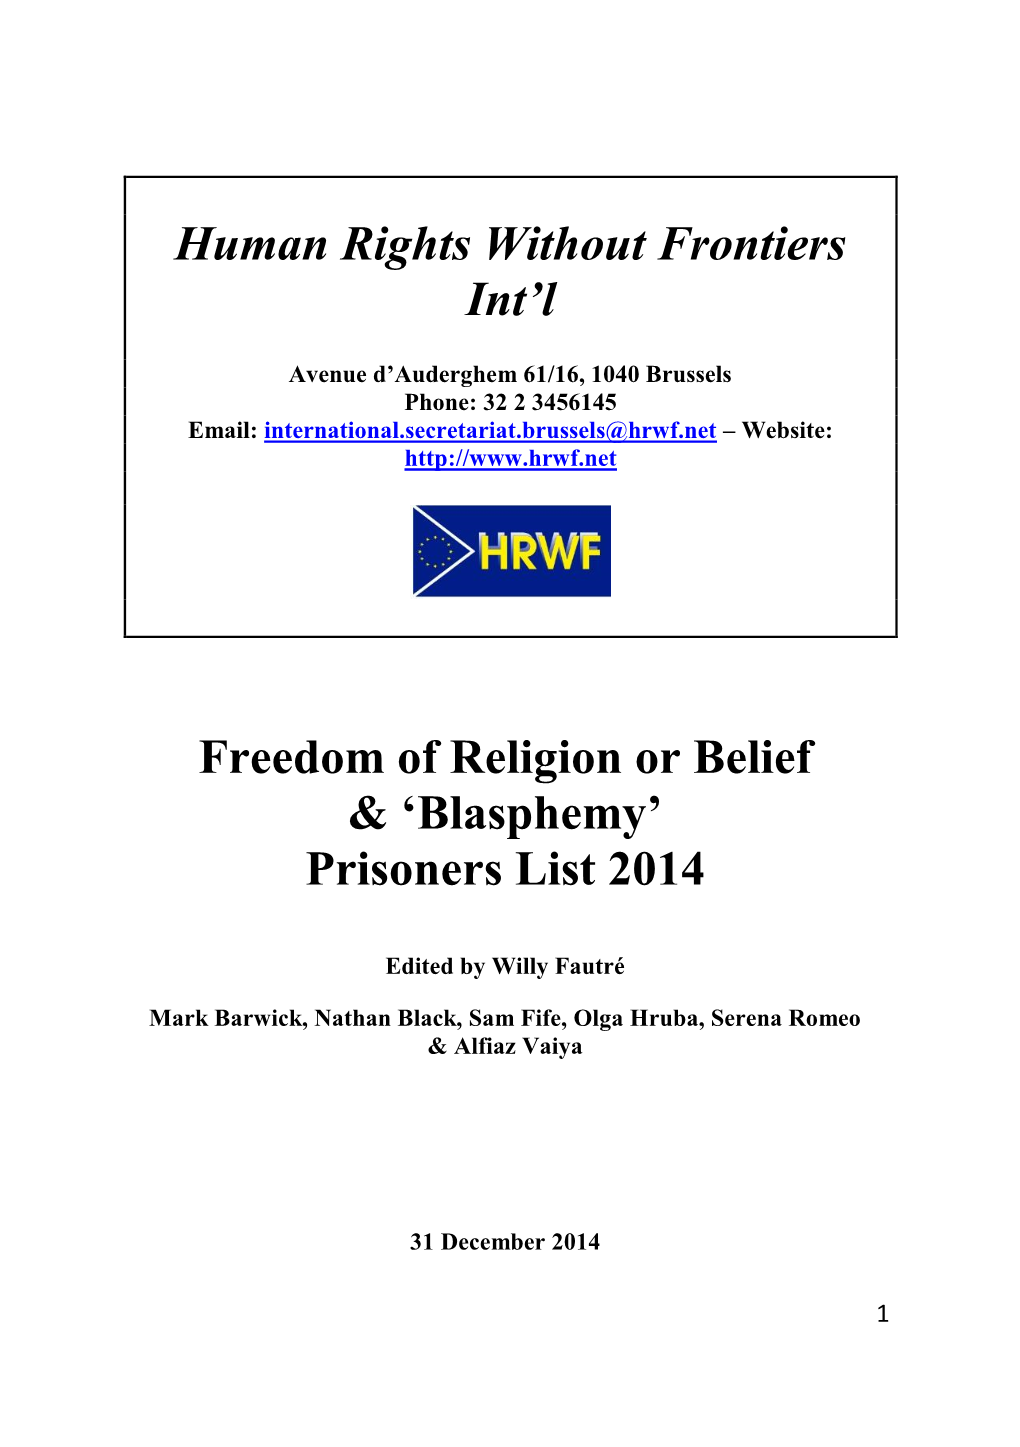 Freedom of Religion Or Belief: Prisoners' List in 20 Countries in 2014